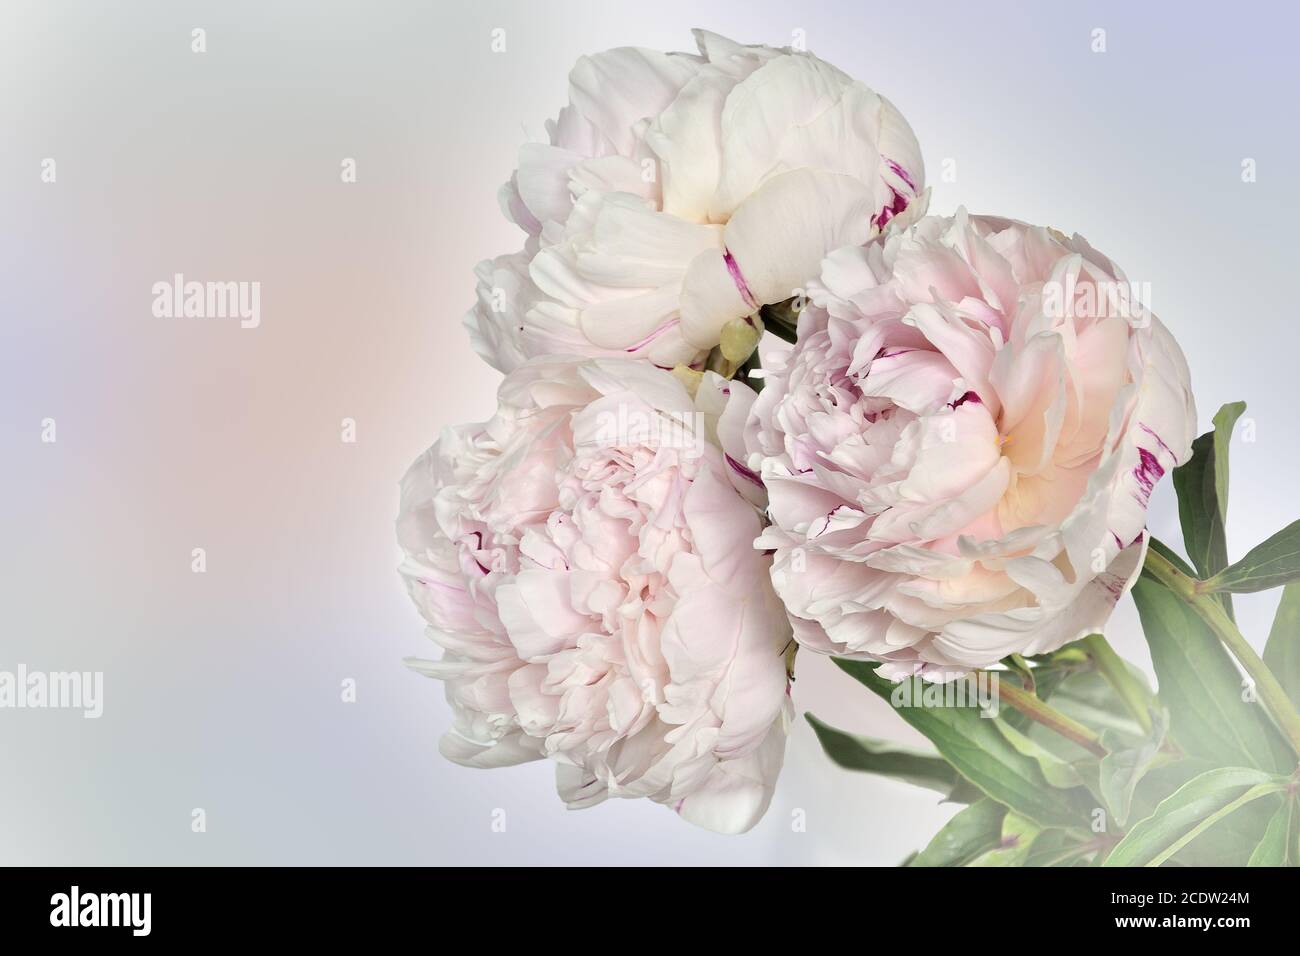 Beautiful bouquet of white-pink peonies on light pastel background Stock Photo